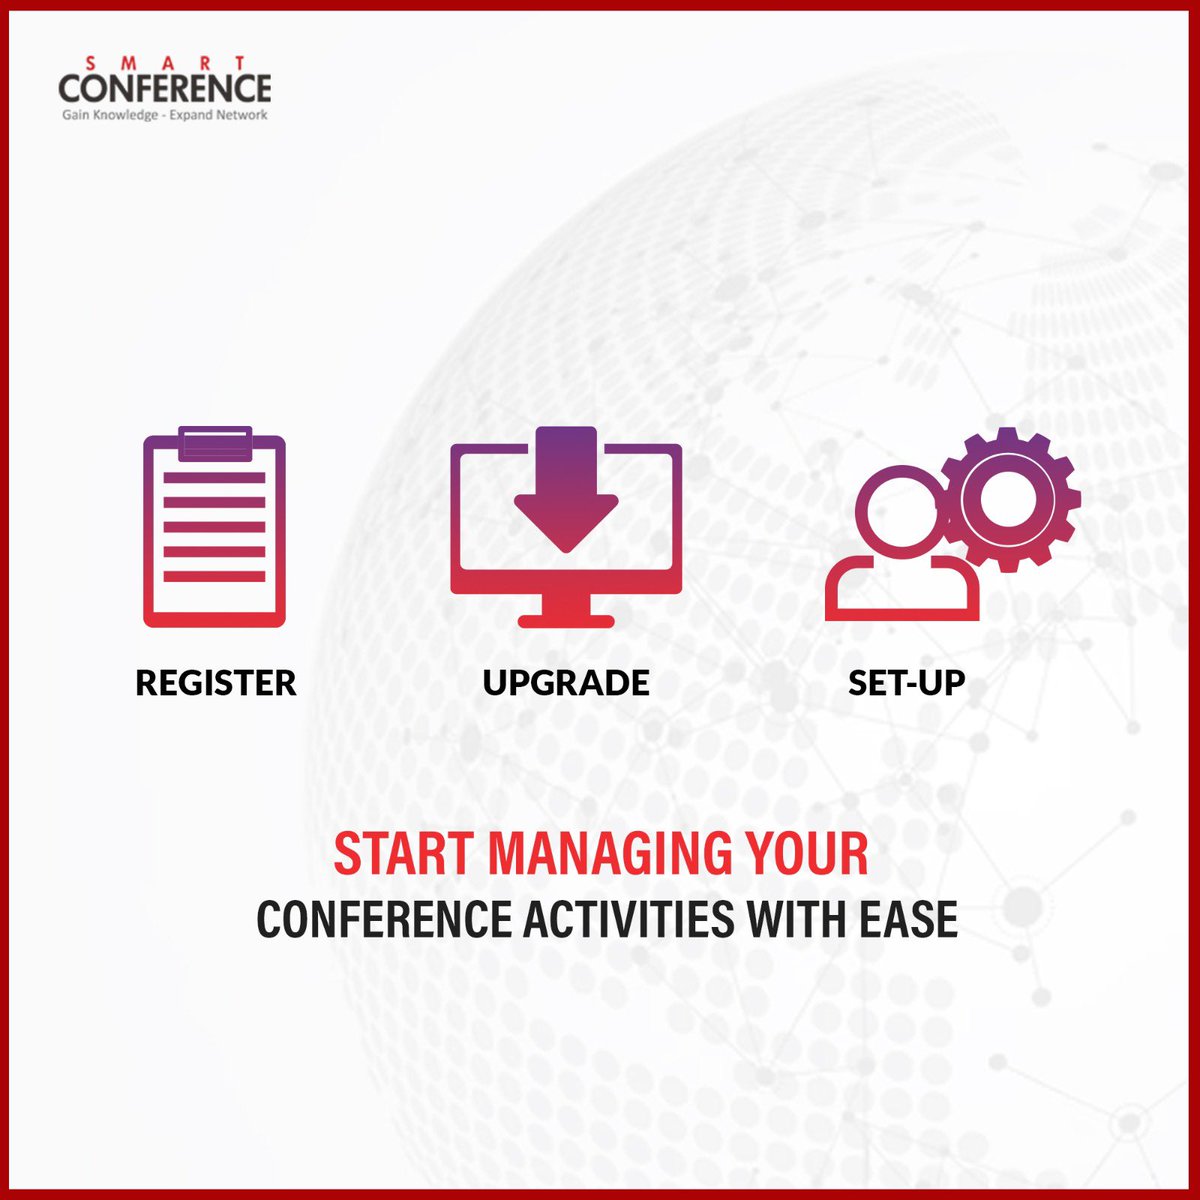 Register your conference for free and start using our Conference Management System! 

Visit our website to know more: smartconference.in

#smartconferences #netwok #networkingevents #networkingconferences #businessesofindia #lucknow #india #registernow #conferencesetup